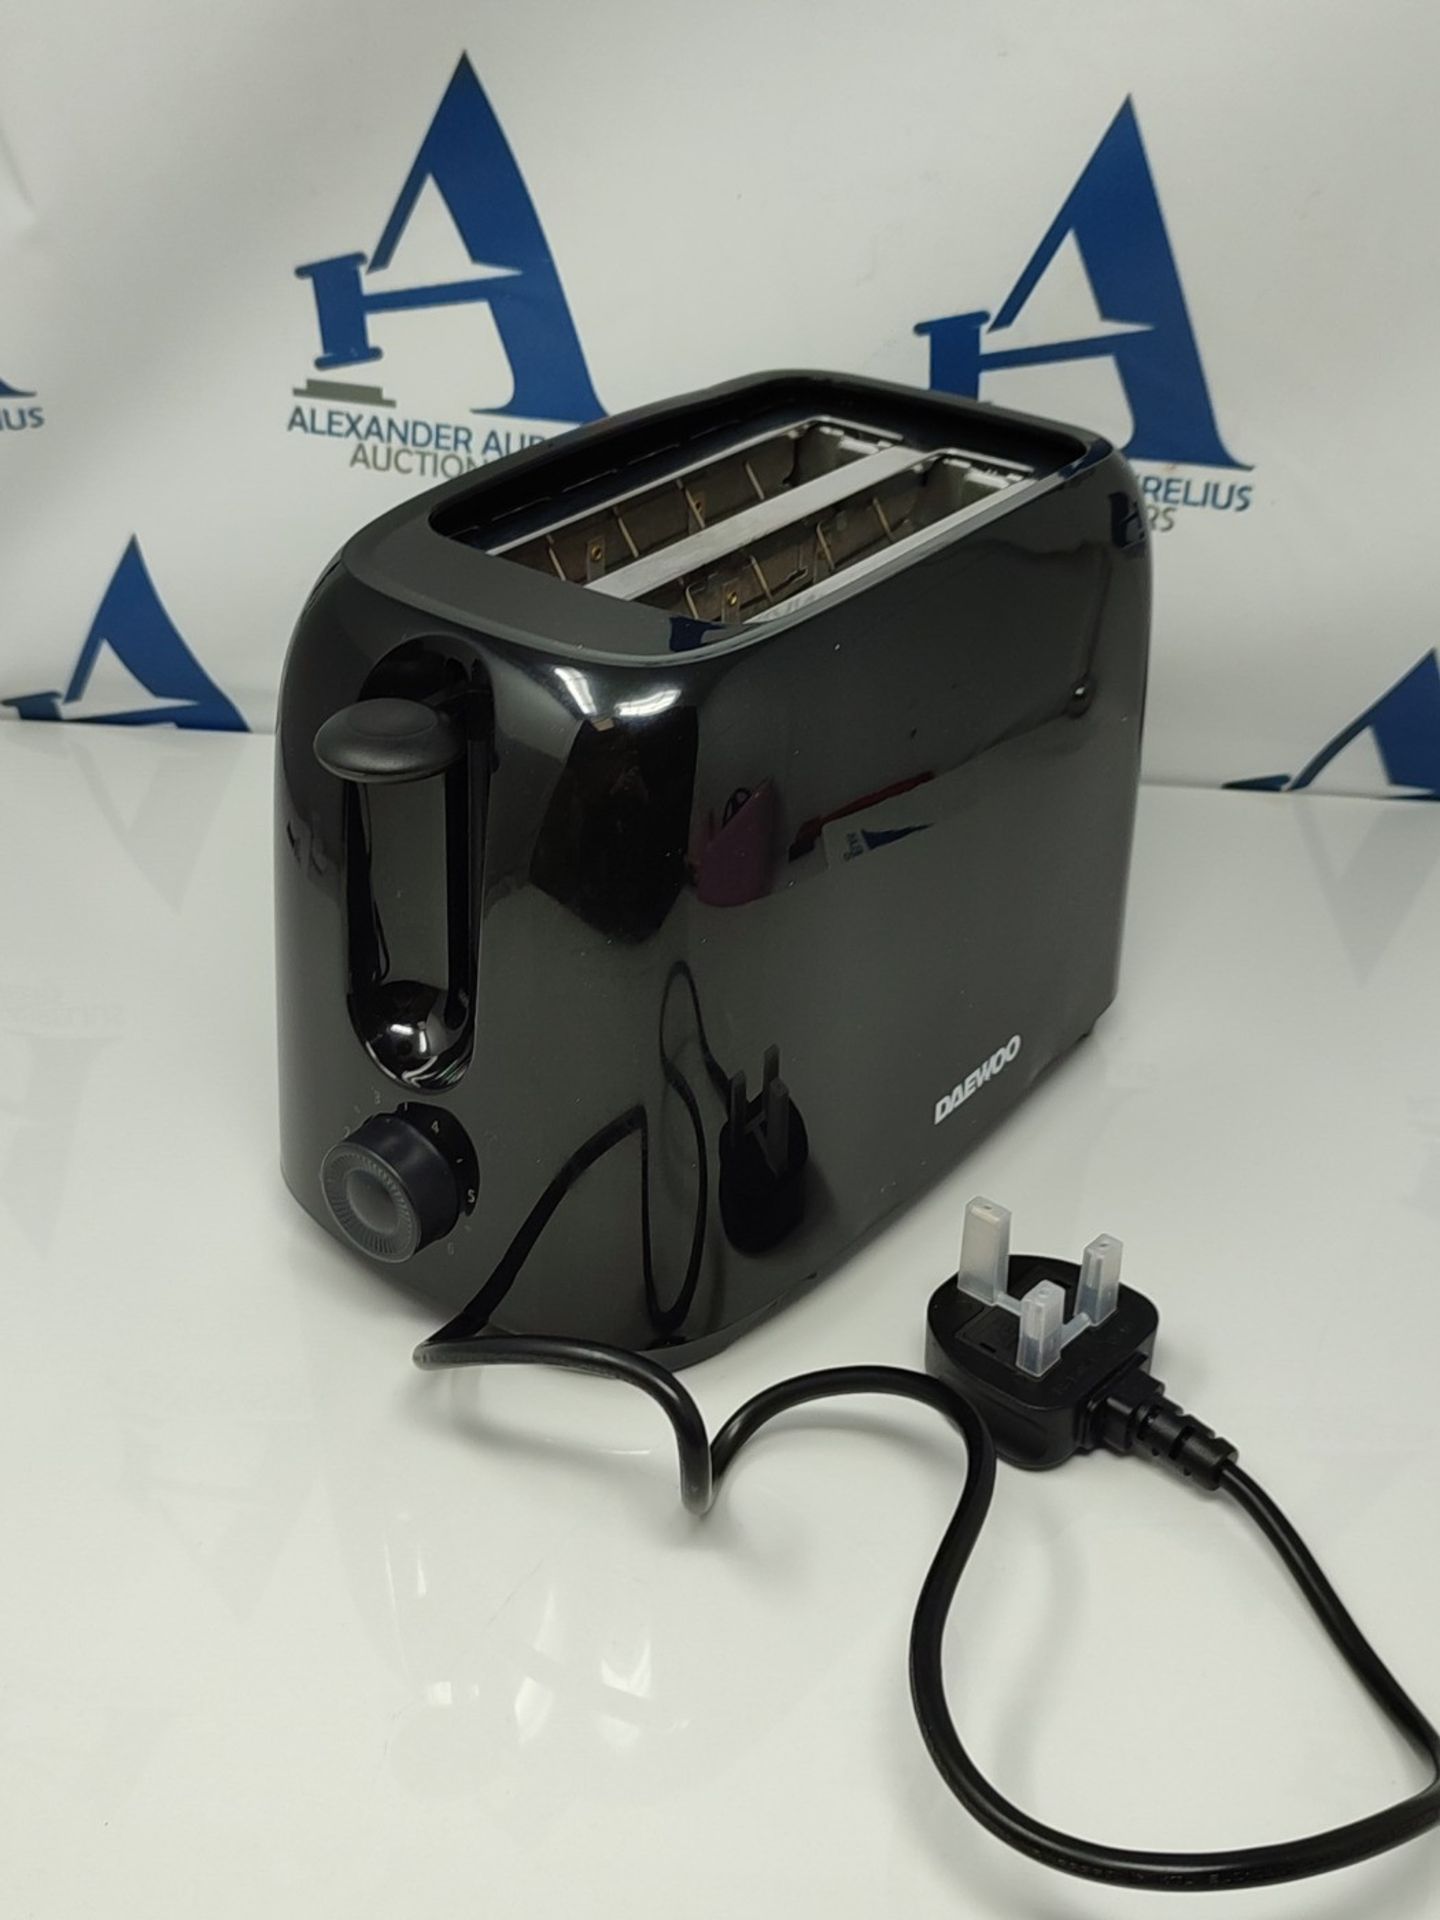 Daewoo Essentials, Plastic 2 Slice Toaster, Black, Variable Browning Controls, Cancel - Image 3 of 3